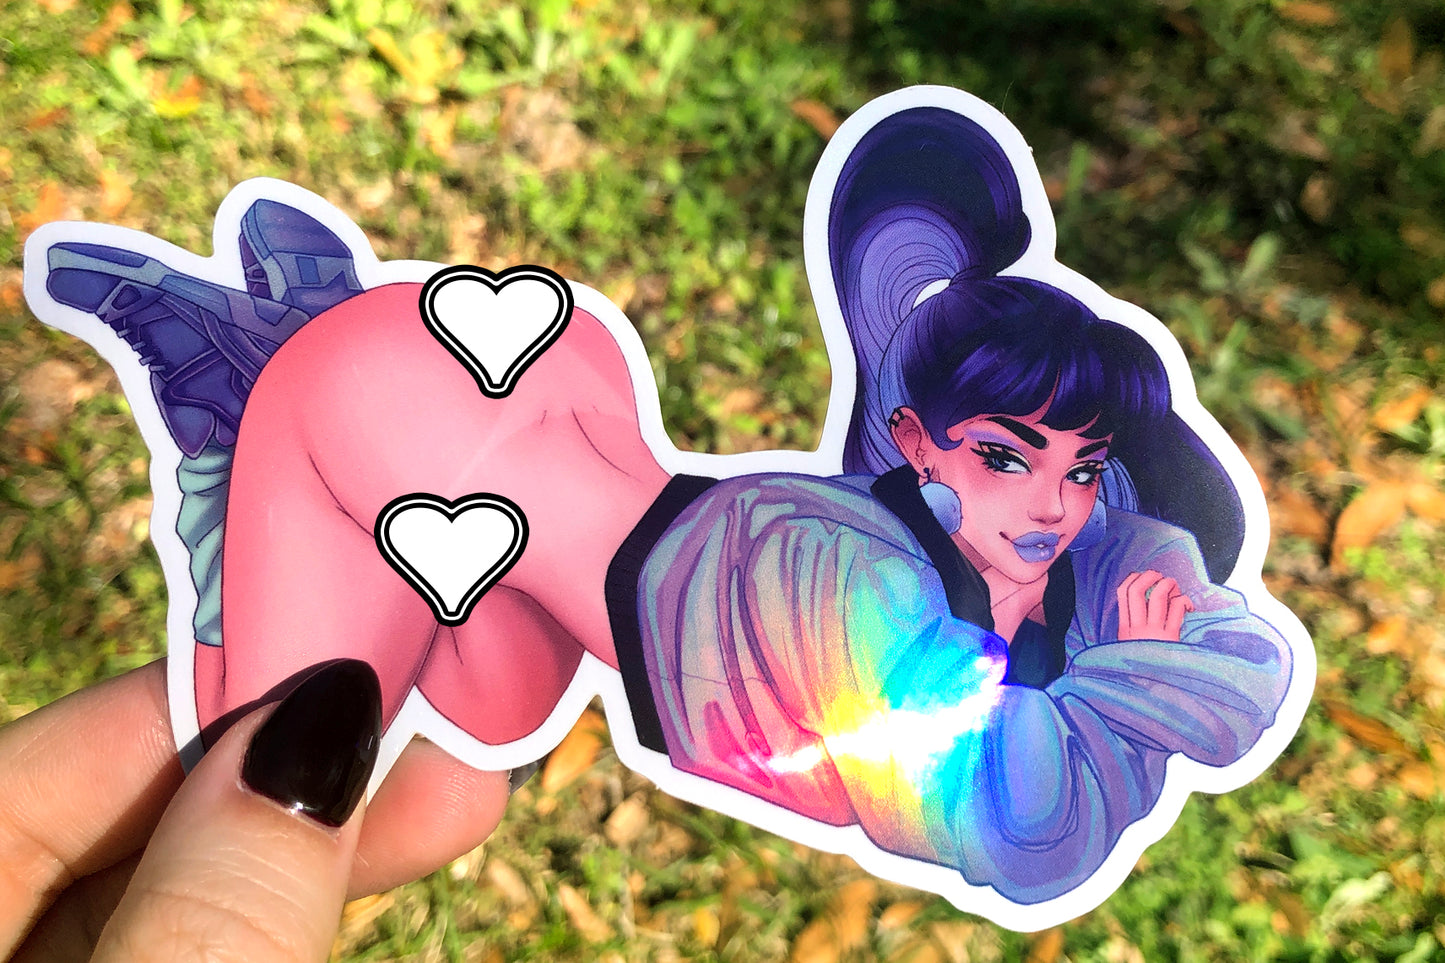 Holographic Cyber Girl Saucy Sticker